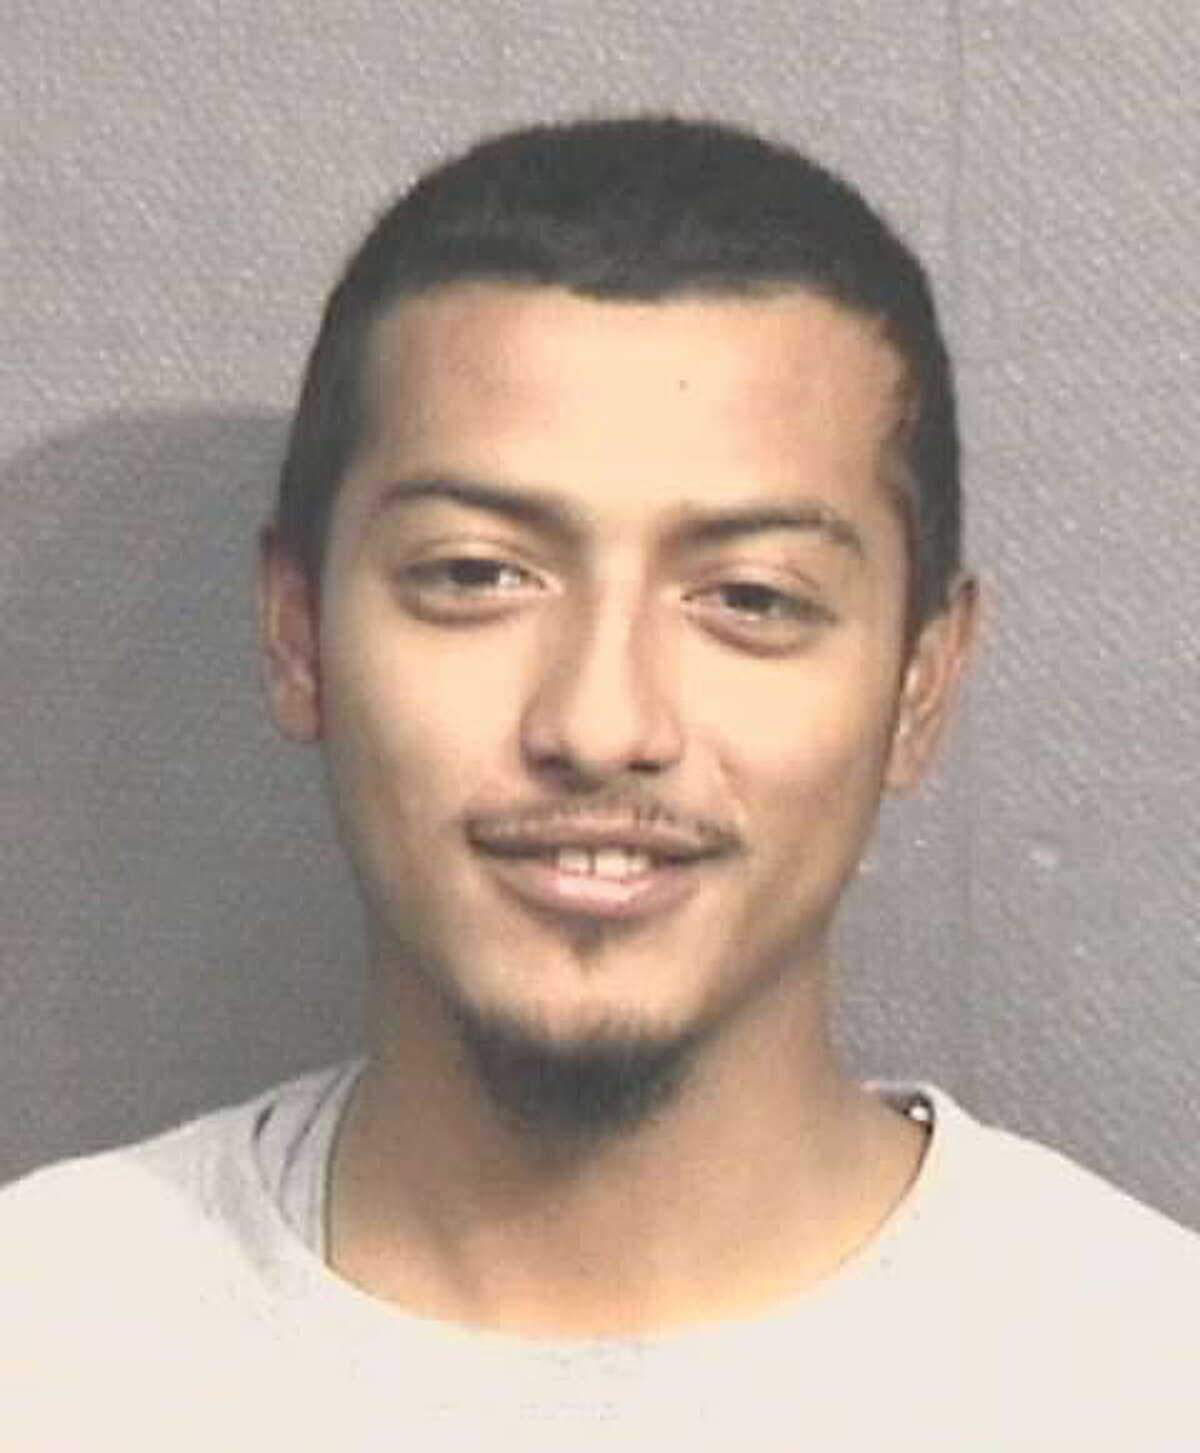 Kevin Anibal Ayala was charged with misdemeanor discharge firearm within city limits for allegedly partaking in celebratory gunfire during 2018 New Year's Eve.